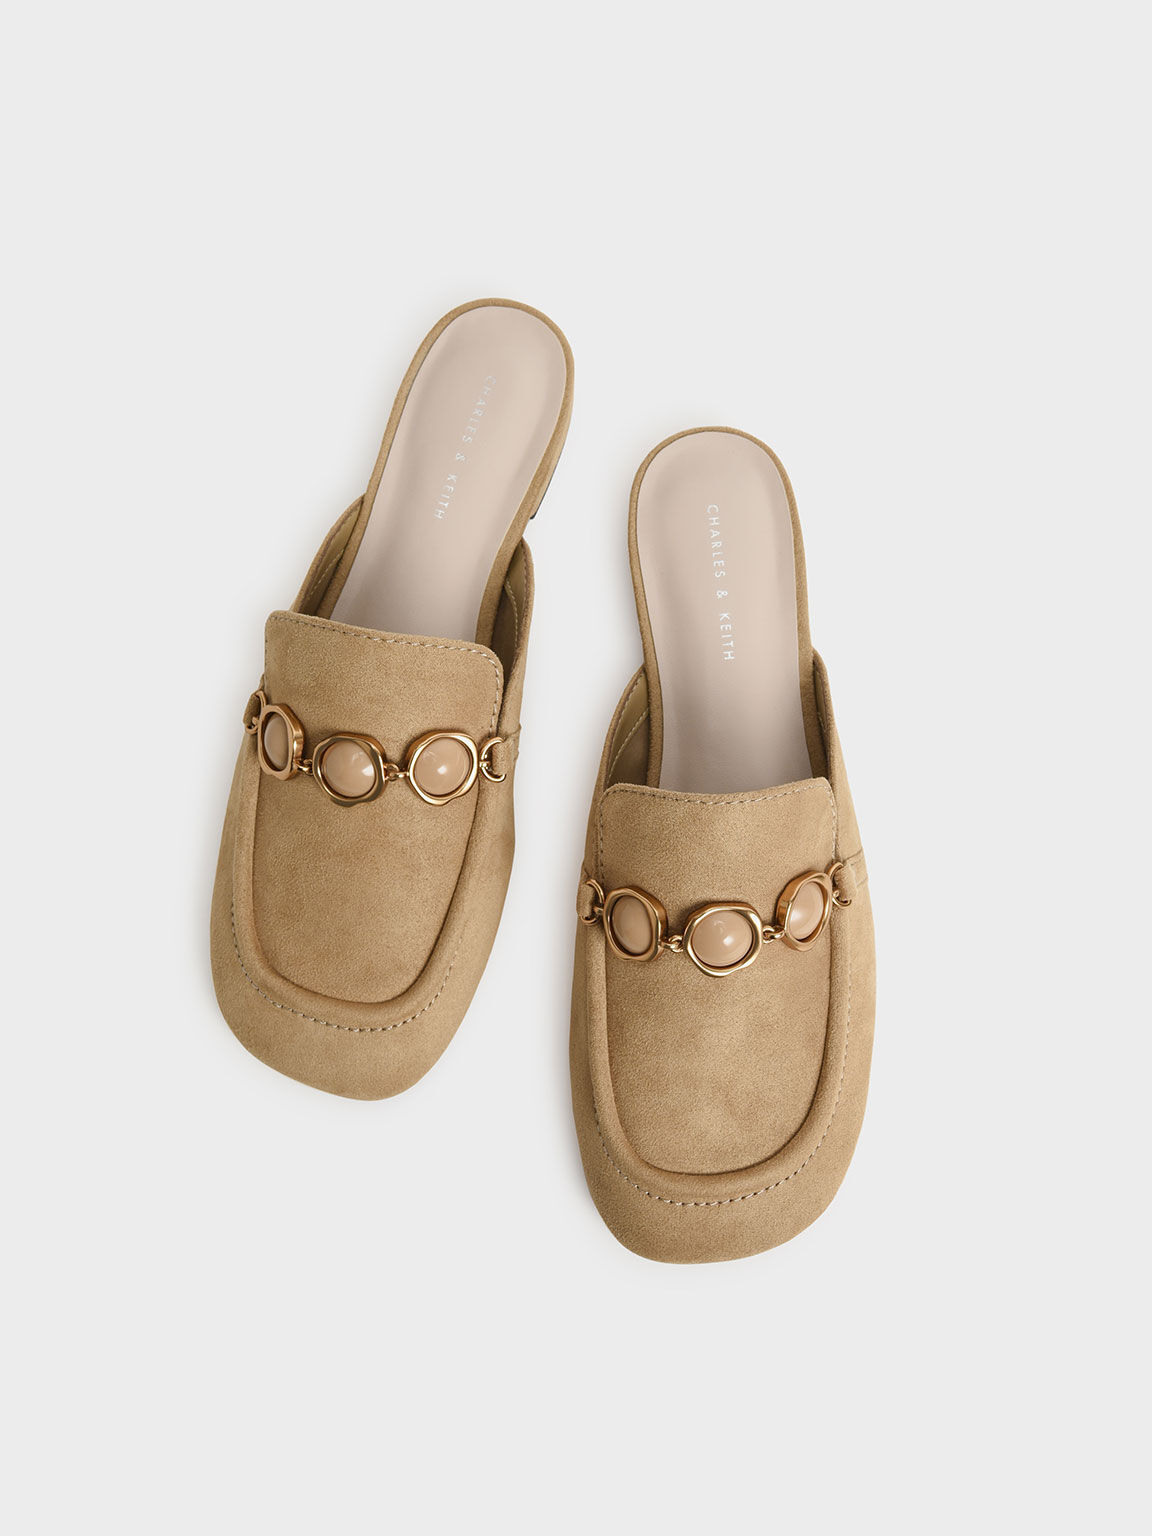 Stone Embellished Chain-Link Textured Loafer Mules, Taupe, hi-res